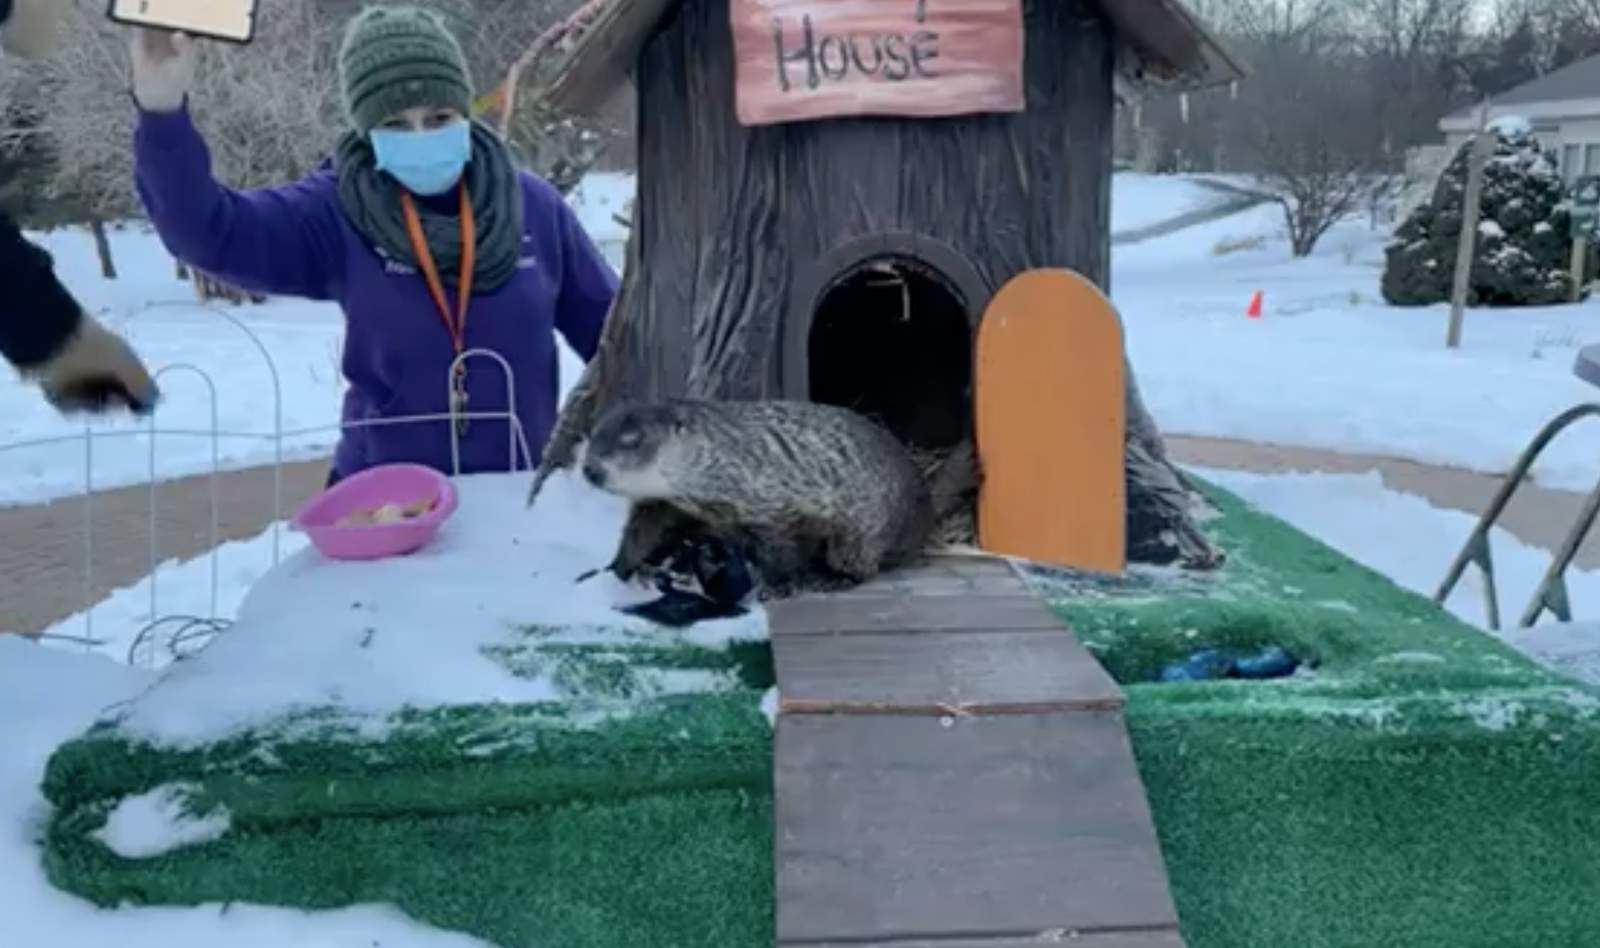 Michigan’s groundhog ‘Woody the Woodchuck’ goes back in house, indicating long winter